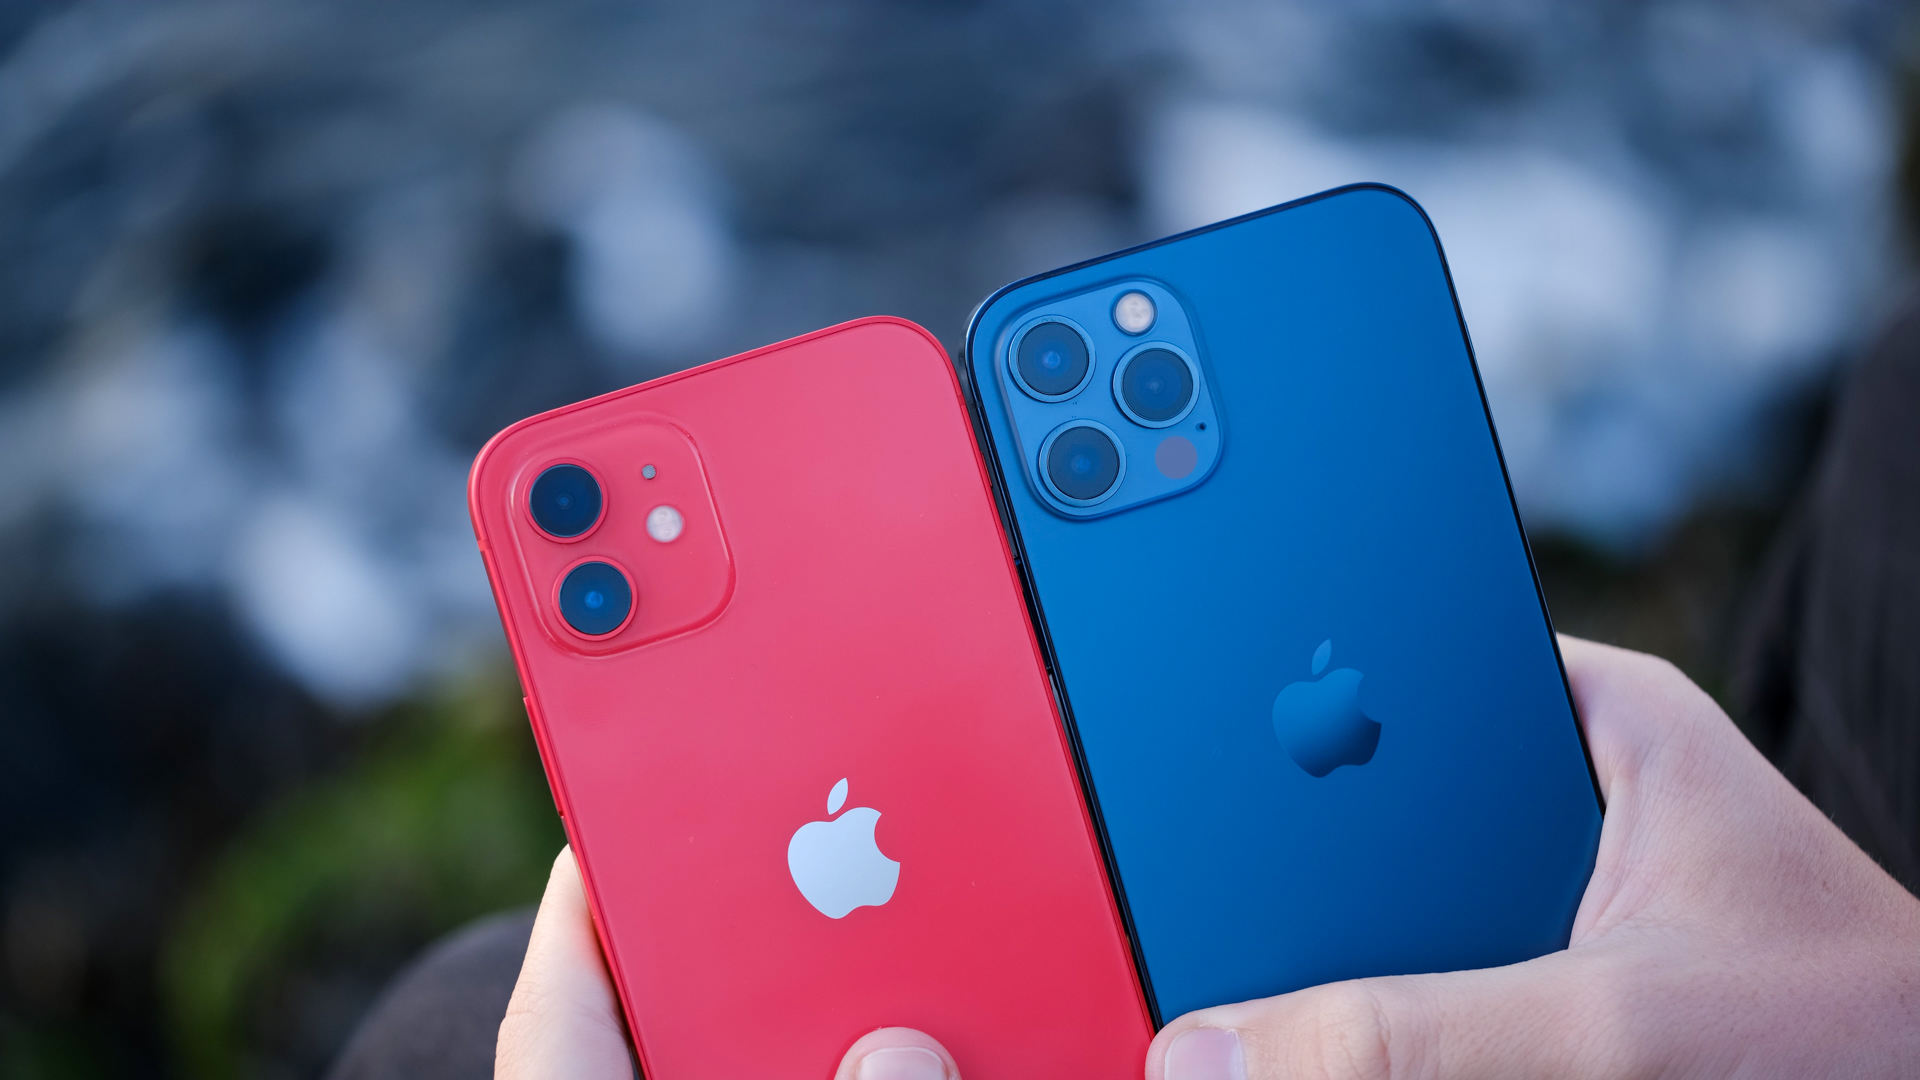 Apple iPhone 12 buyer's guide: What to know in 2022 - Android